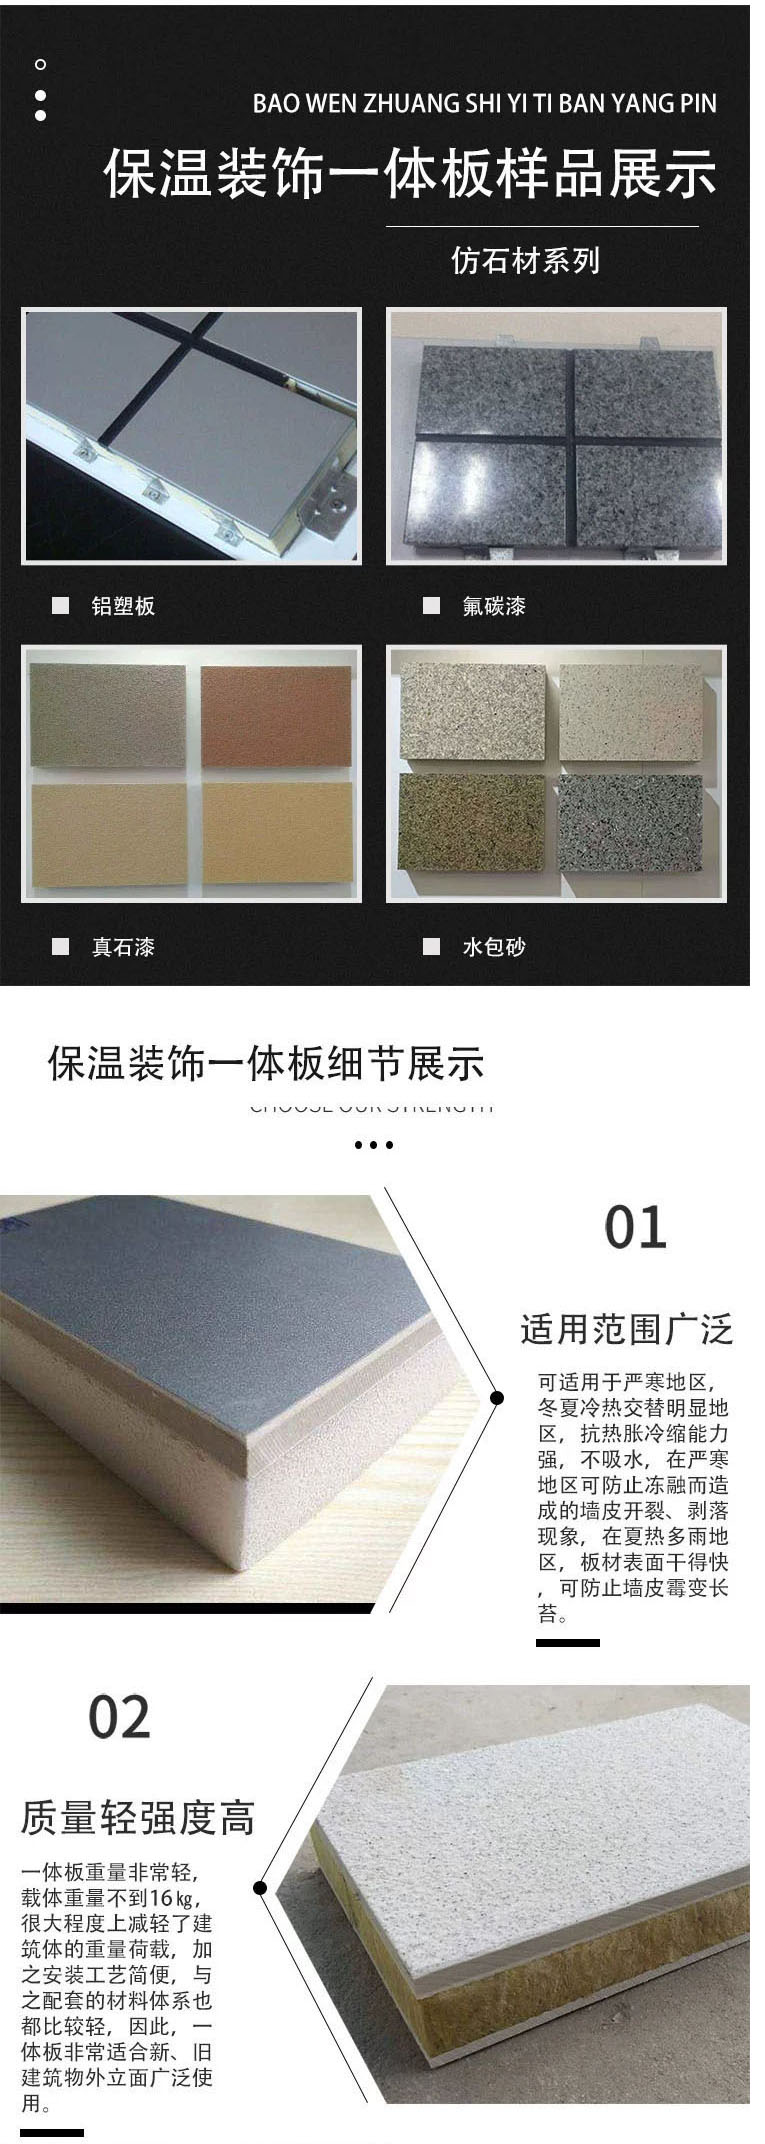 Bozun water in water decorative panel, rock wool exterior wall insulation decorative integrated panel, composite decorative panel